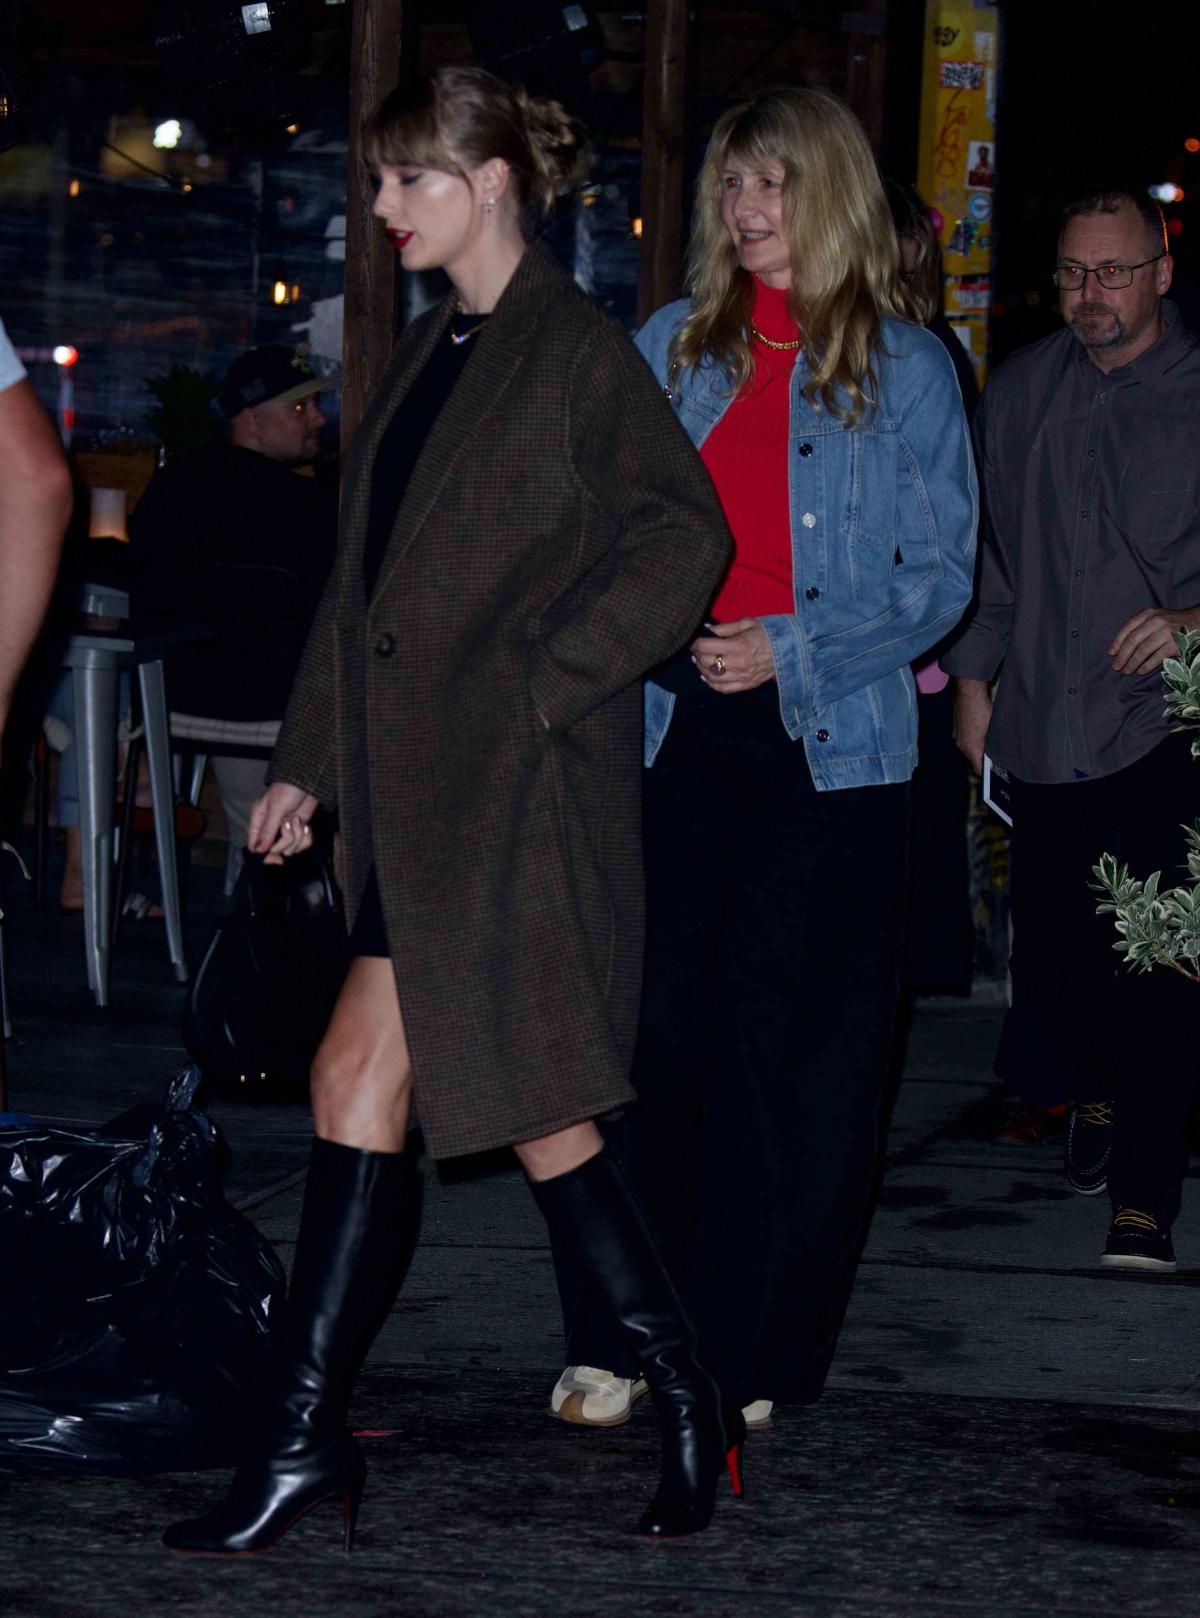 Taylor Swift's Latest Girls' Night Out Included Greta Gerwig, Zoë